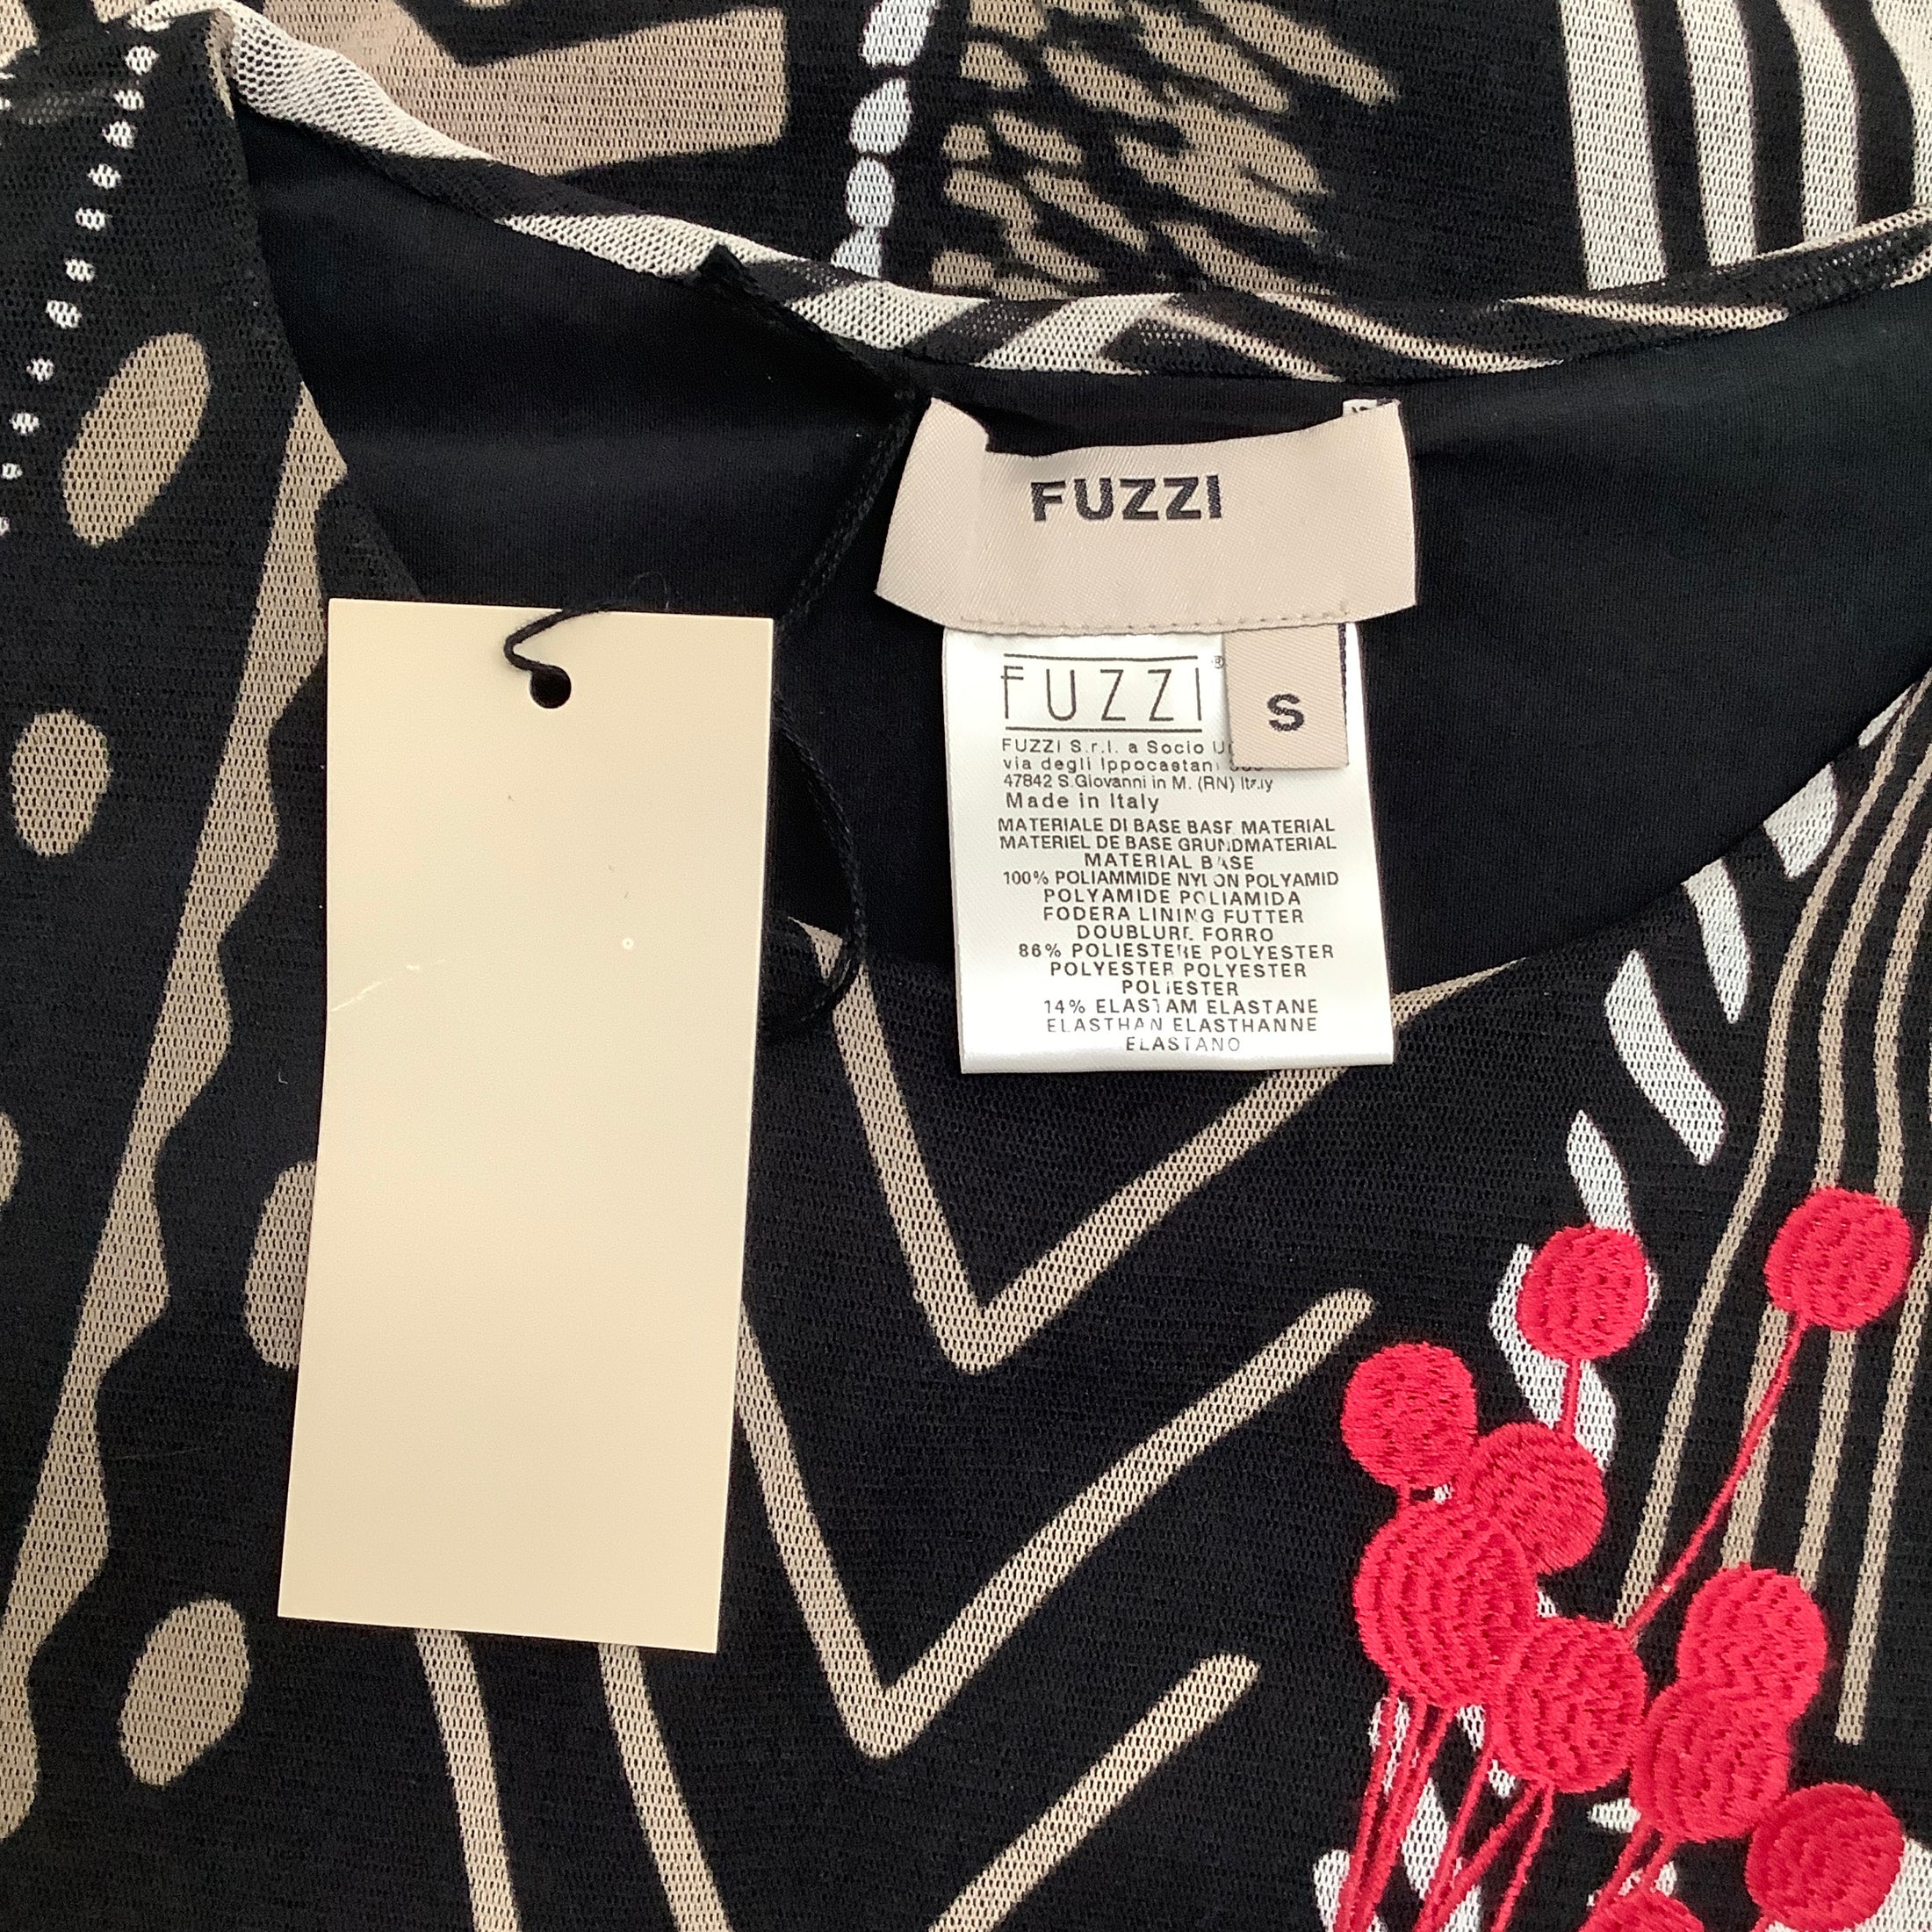 Fuzzi Black / Tan Abstract Print Dress with Red Flower Embellishment